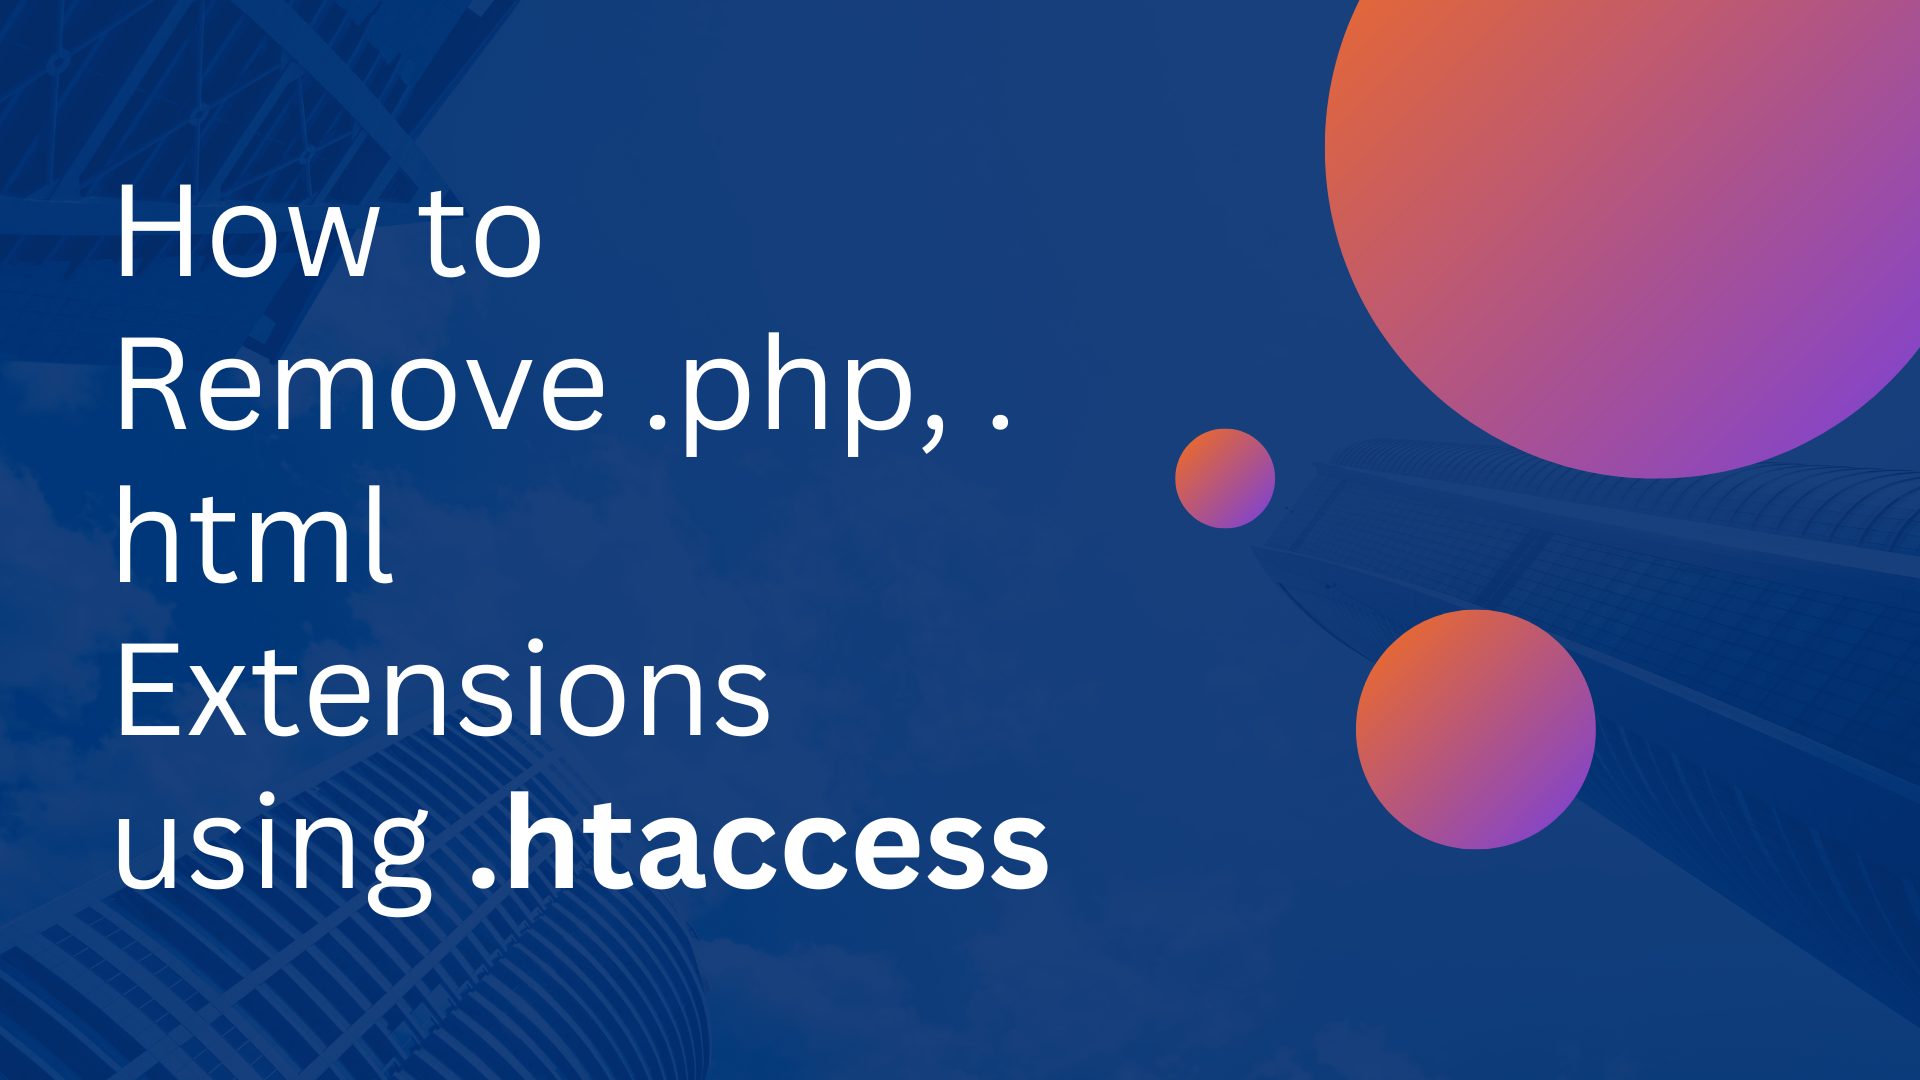 How to Remove .php, .html Extensions using .htaccess